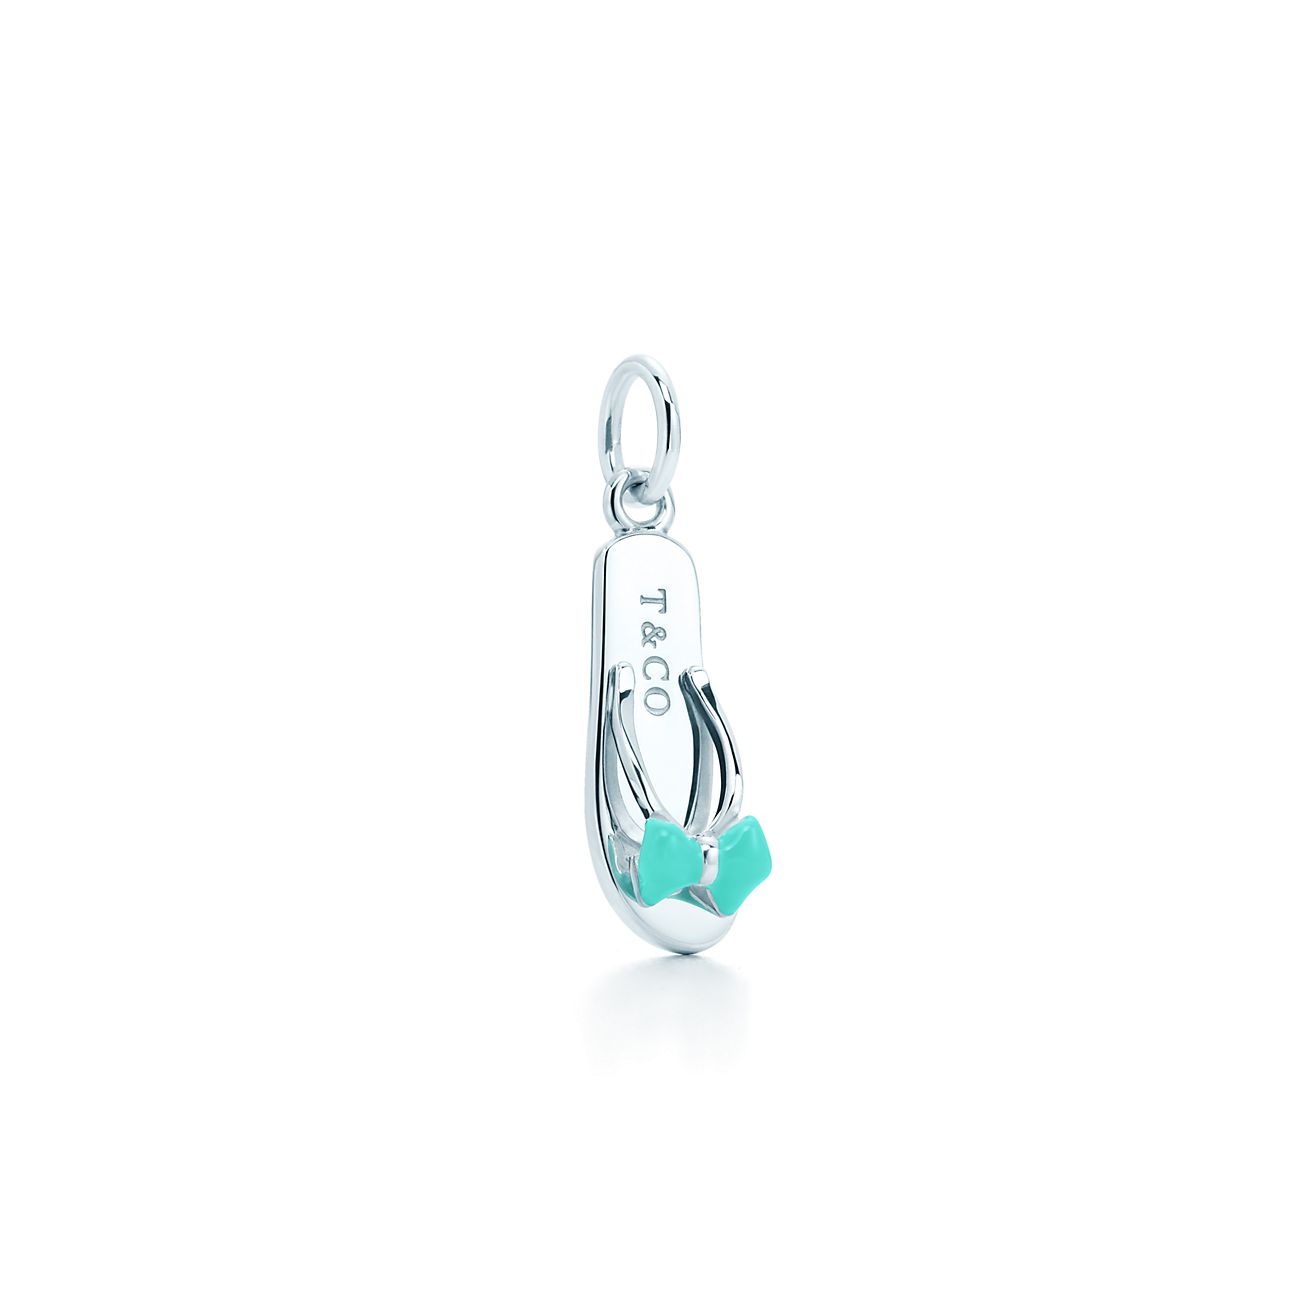 Flip-flop charm in sterling silver with 